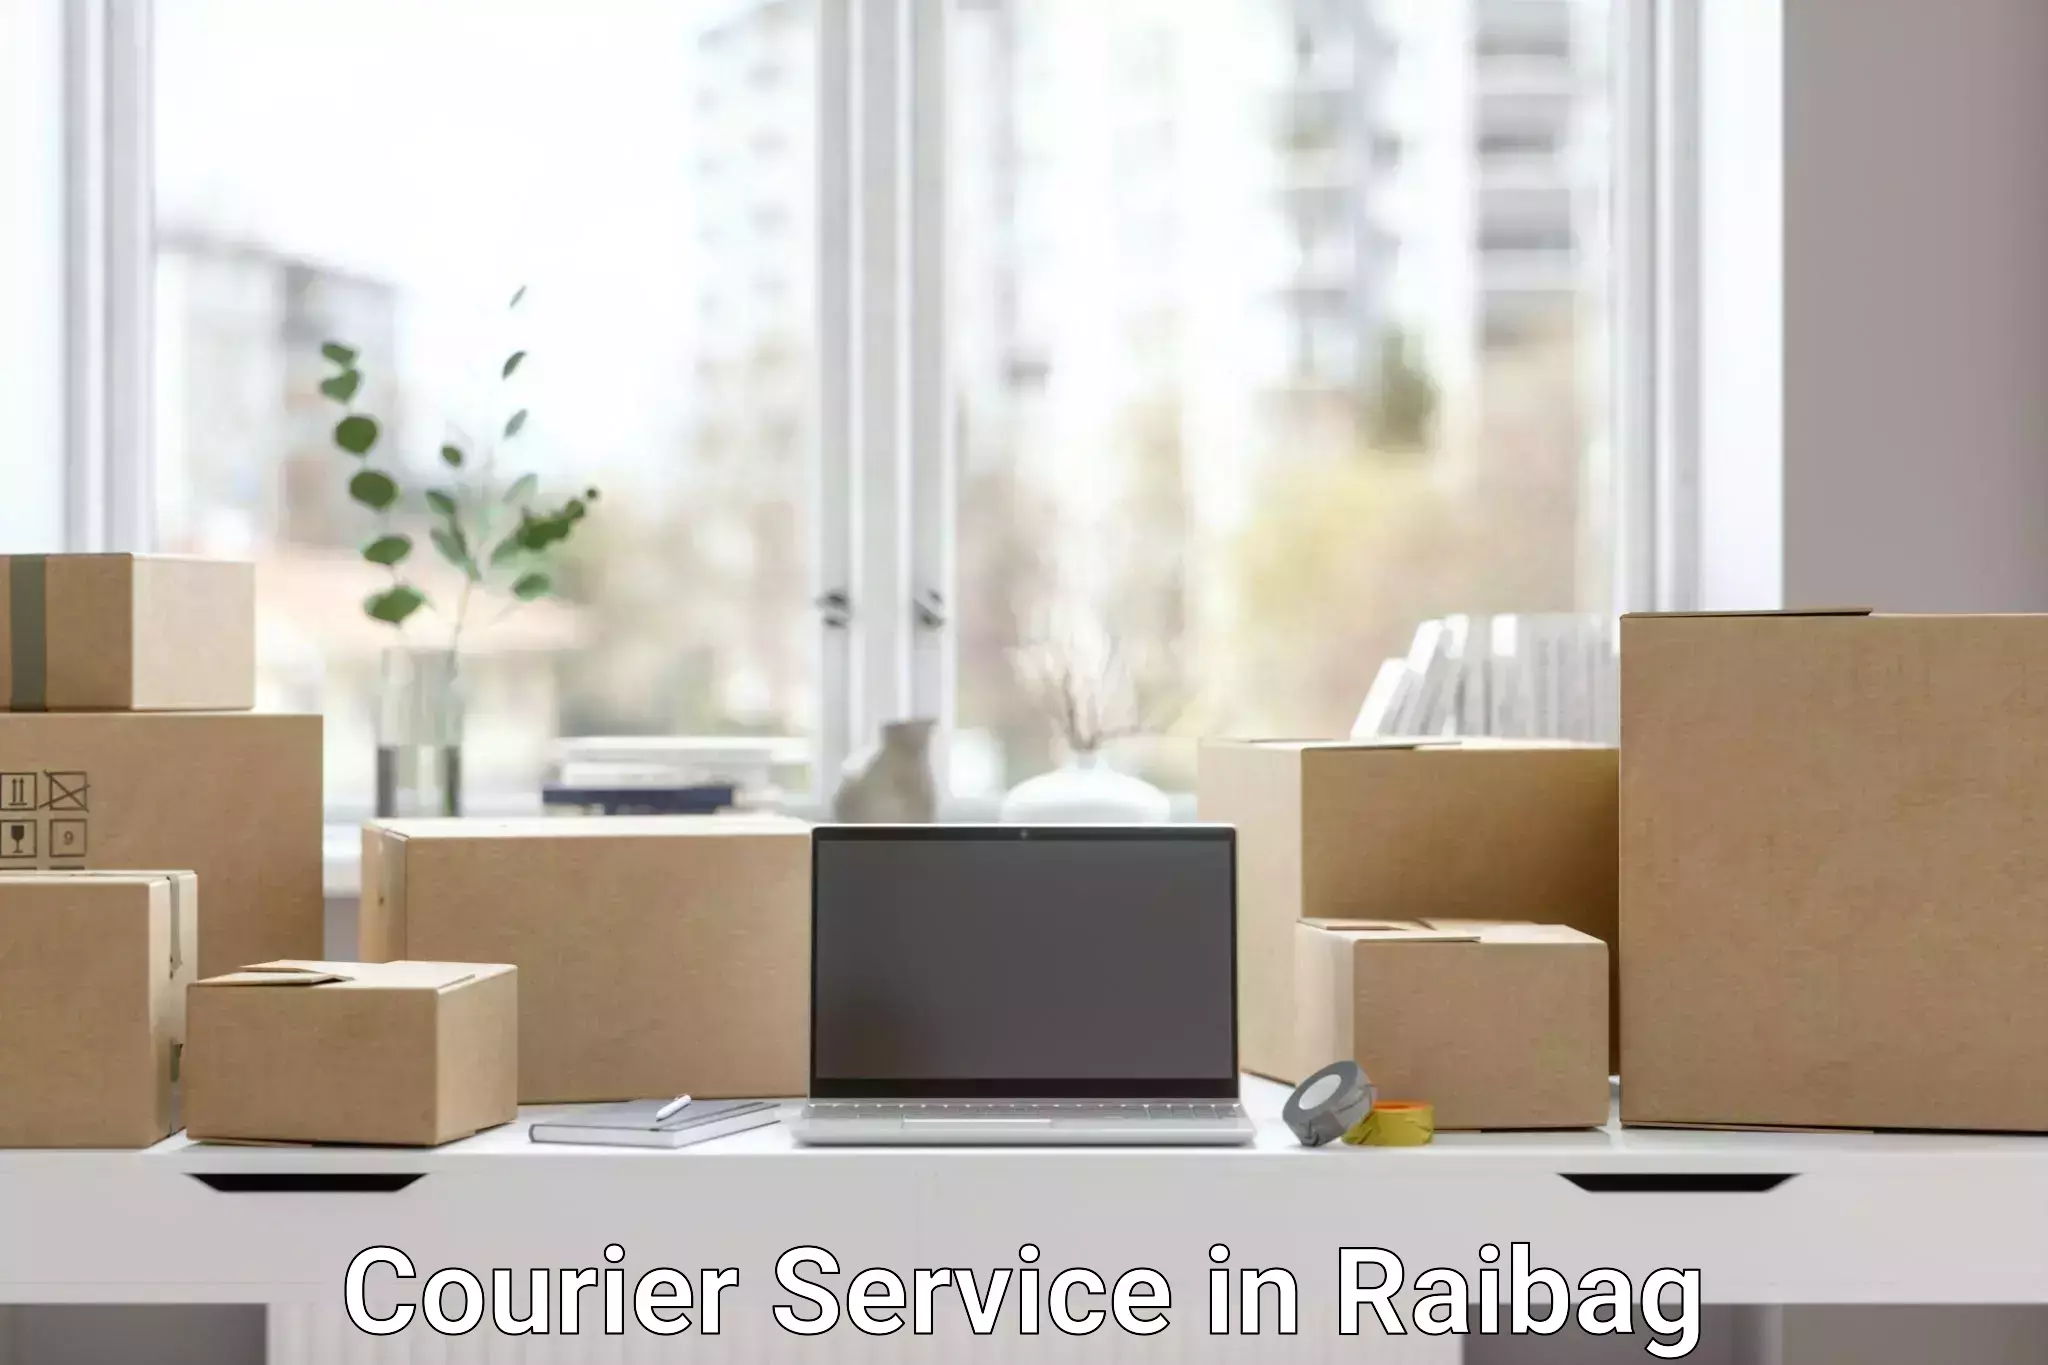 24-hour courier services in Raibag